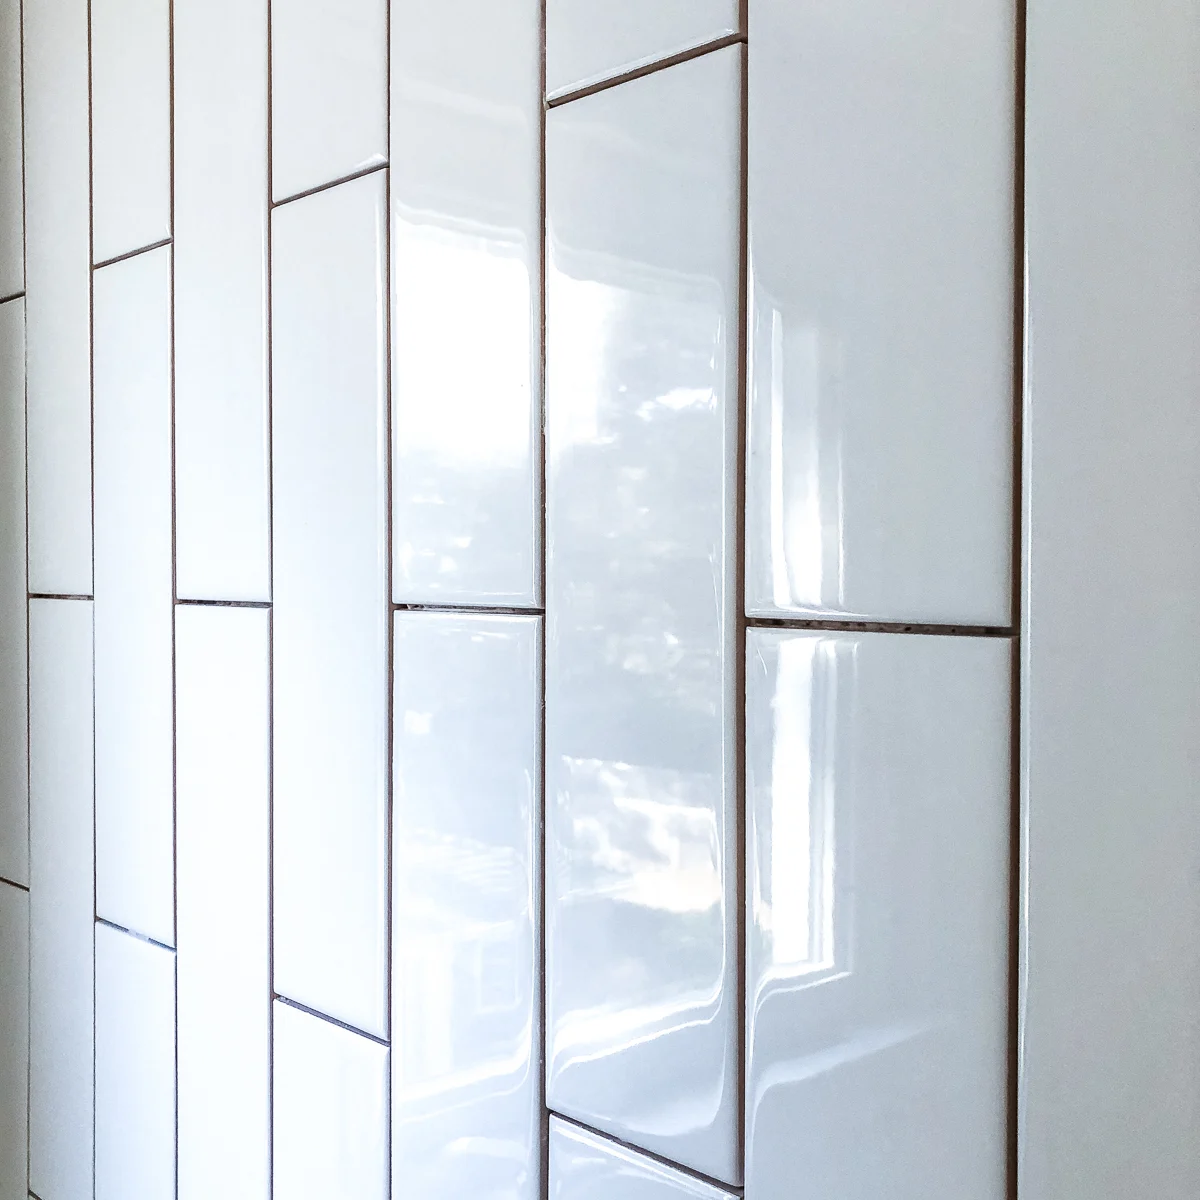 3"x12" long subway tile installed vertically on bathroom wall